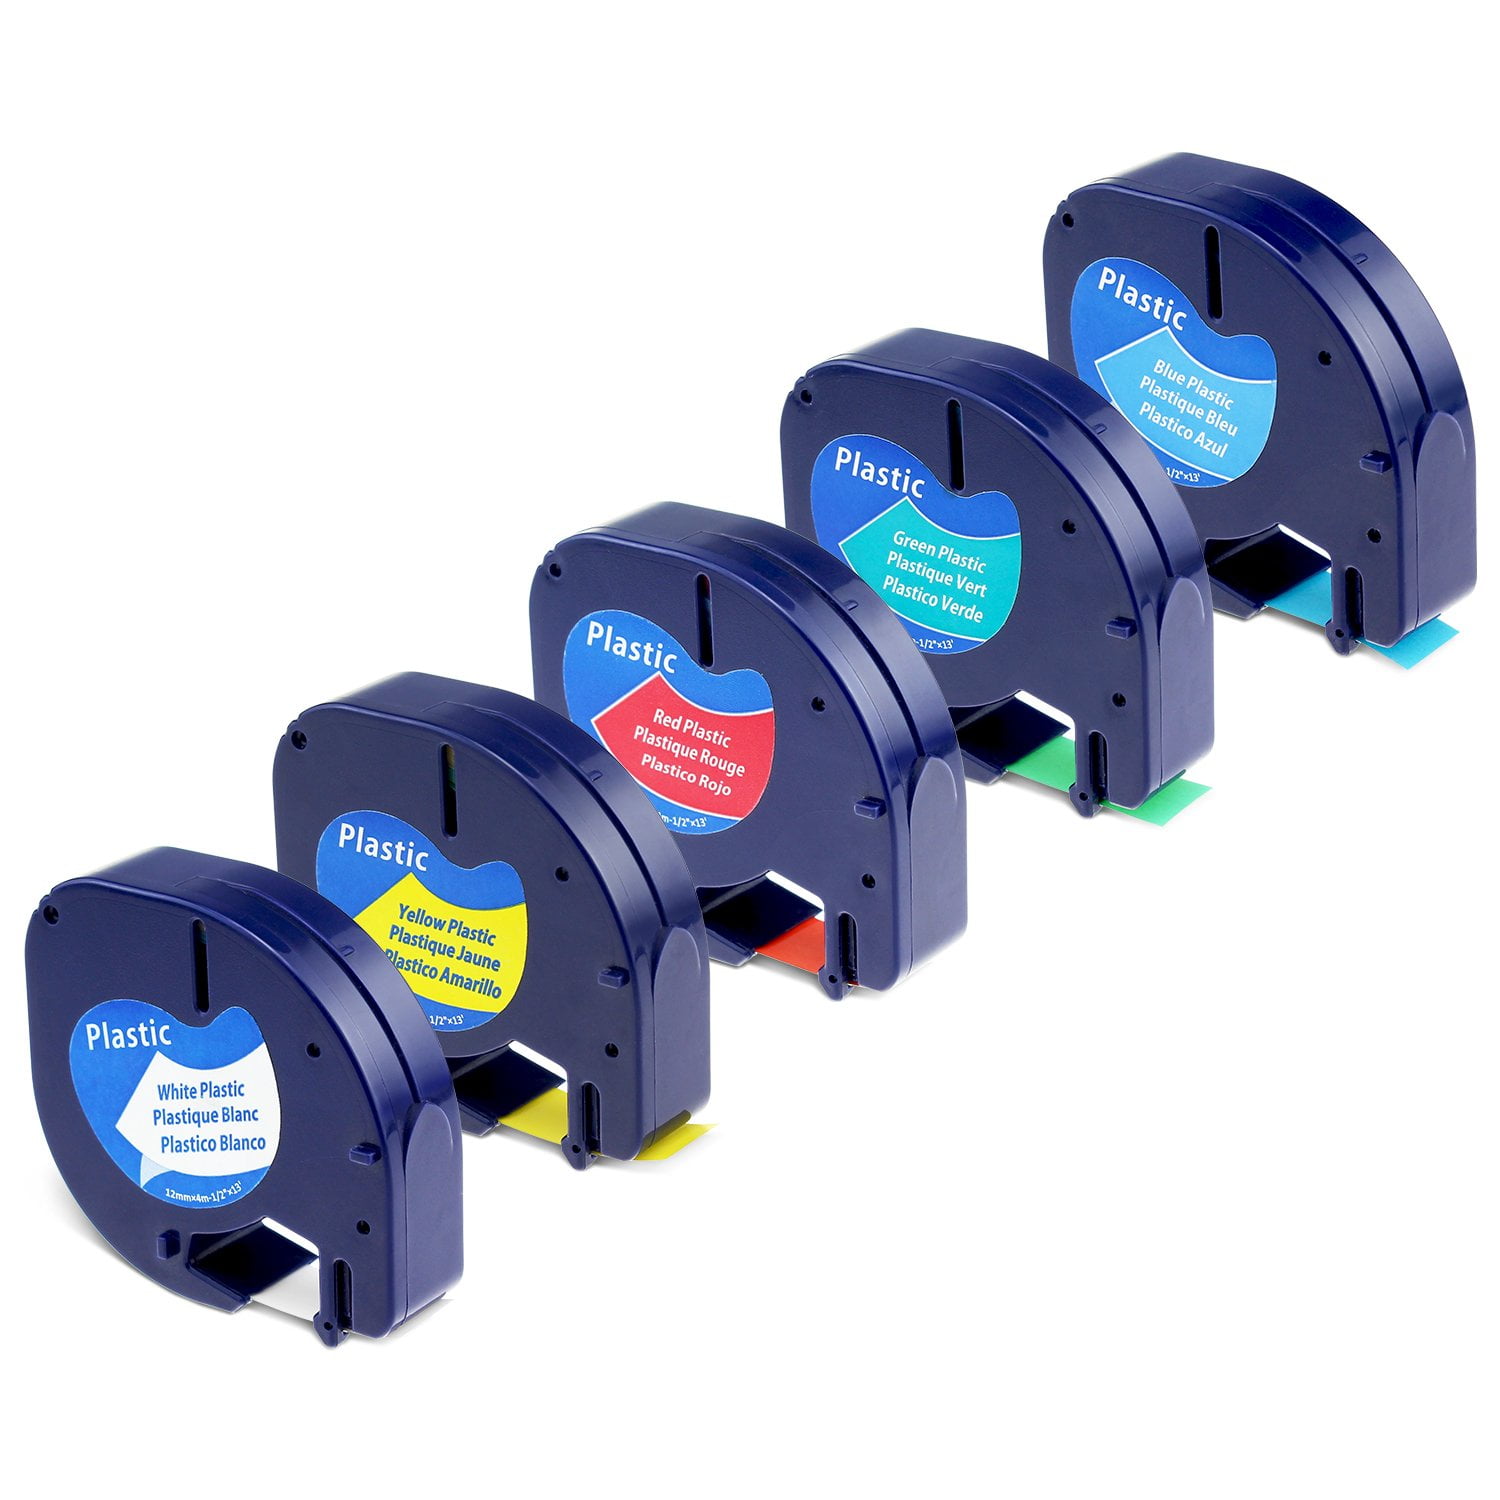 5X Compatible Dymo LetraTag Plastic Label Tape 12 mm x 4 m Black on White/Yellow/Blue/Red/Green for Dymo LetraTag LT100H LT100T LT110T QX50 XR Label Maker